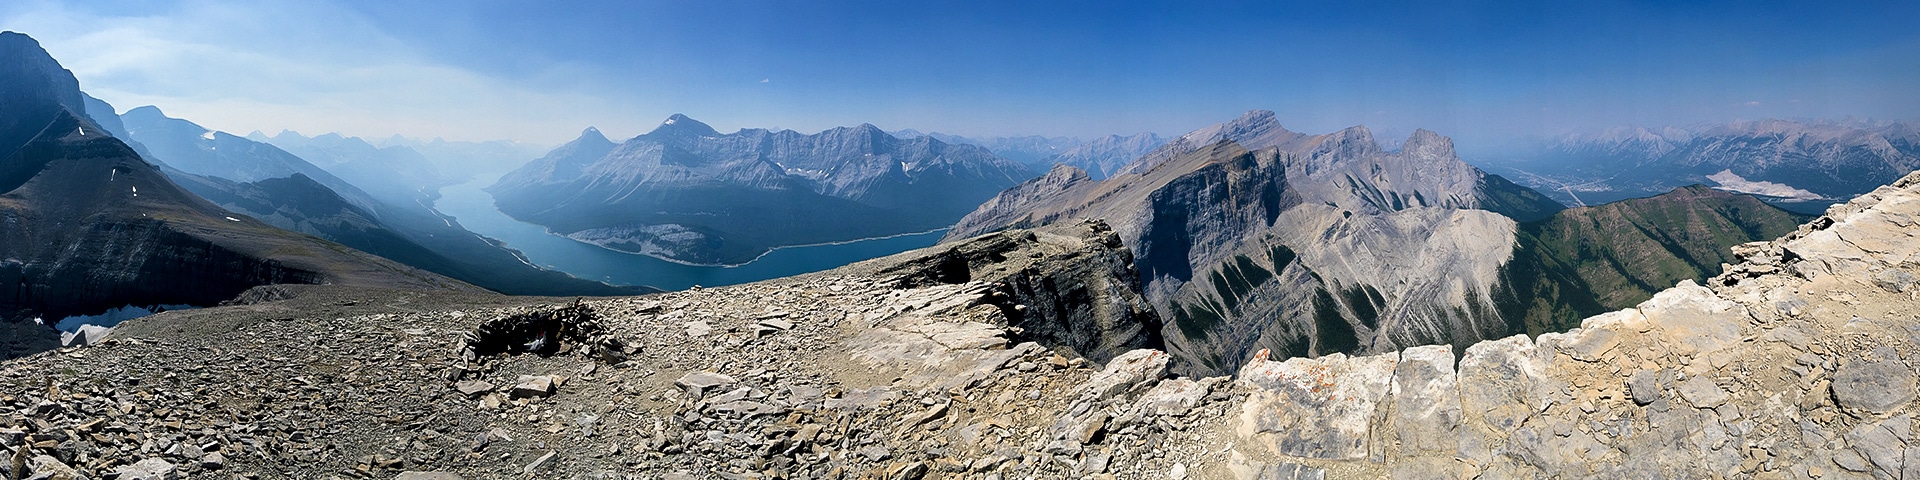 Panorama of the Windtower hike from Smith-Dorrien Trail in Kananaskis near Canmore